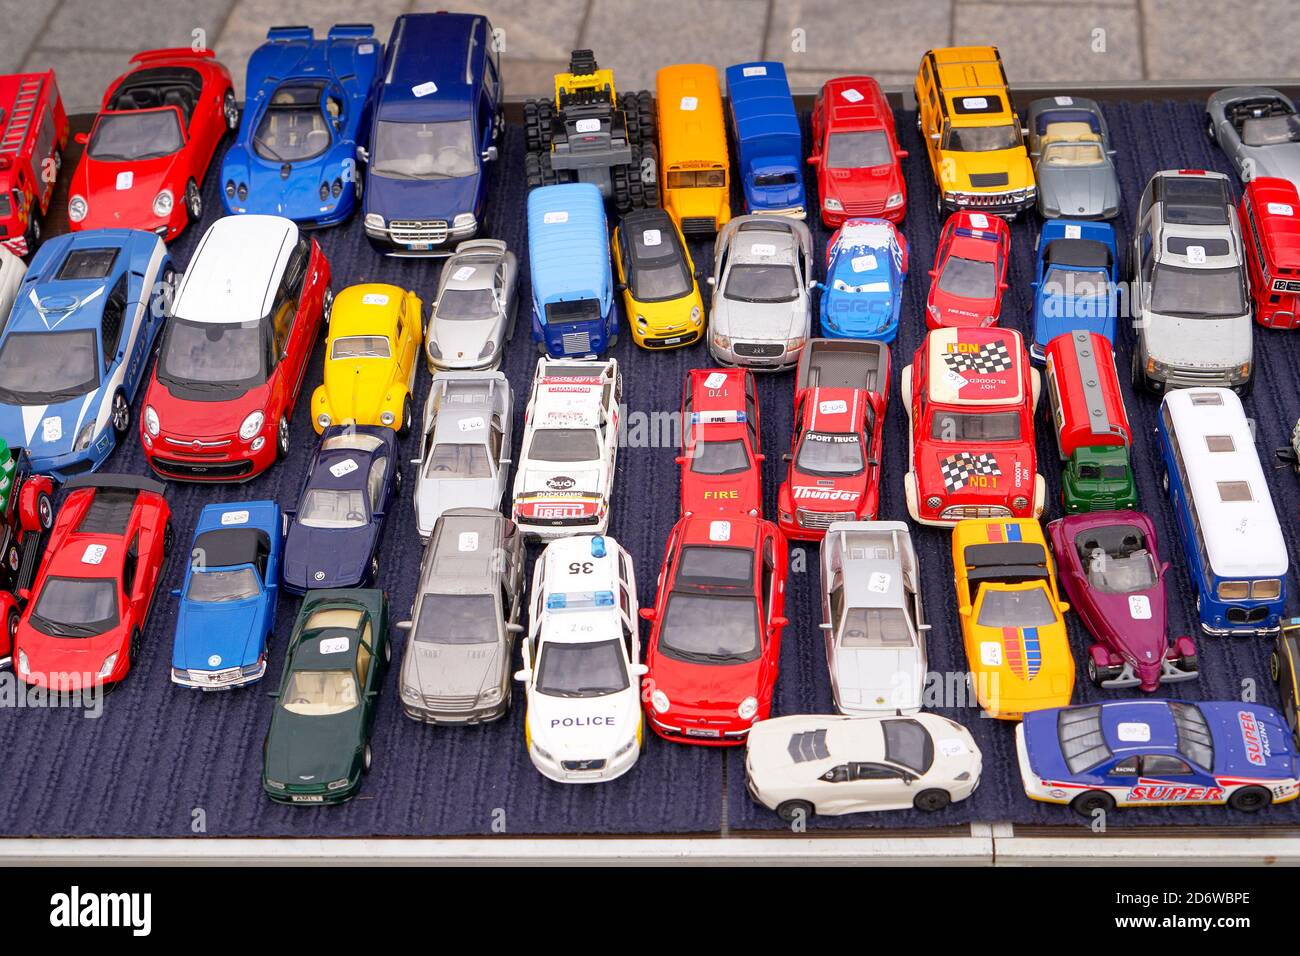 Used second hand scale model toy cars for sale at a car boot sale Stock Photo